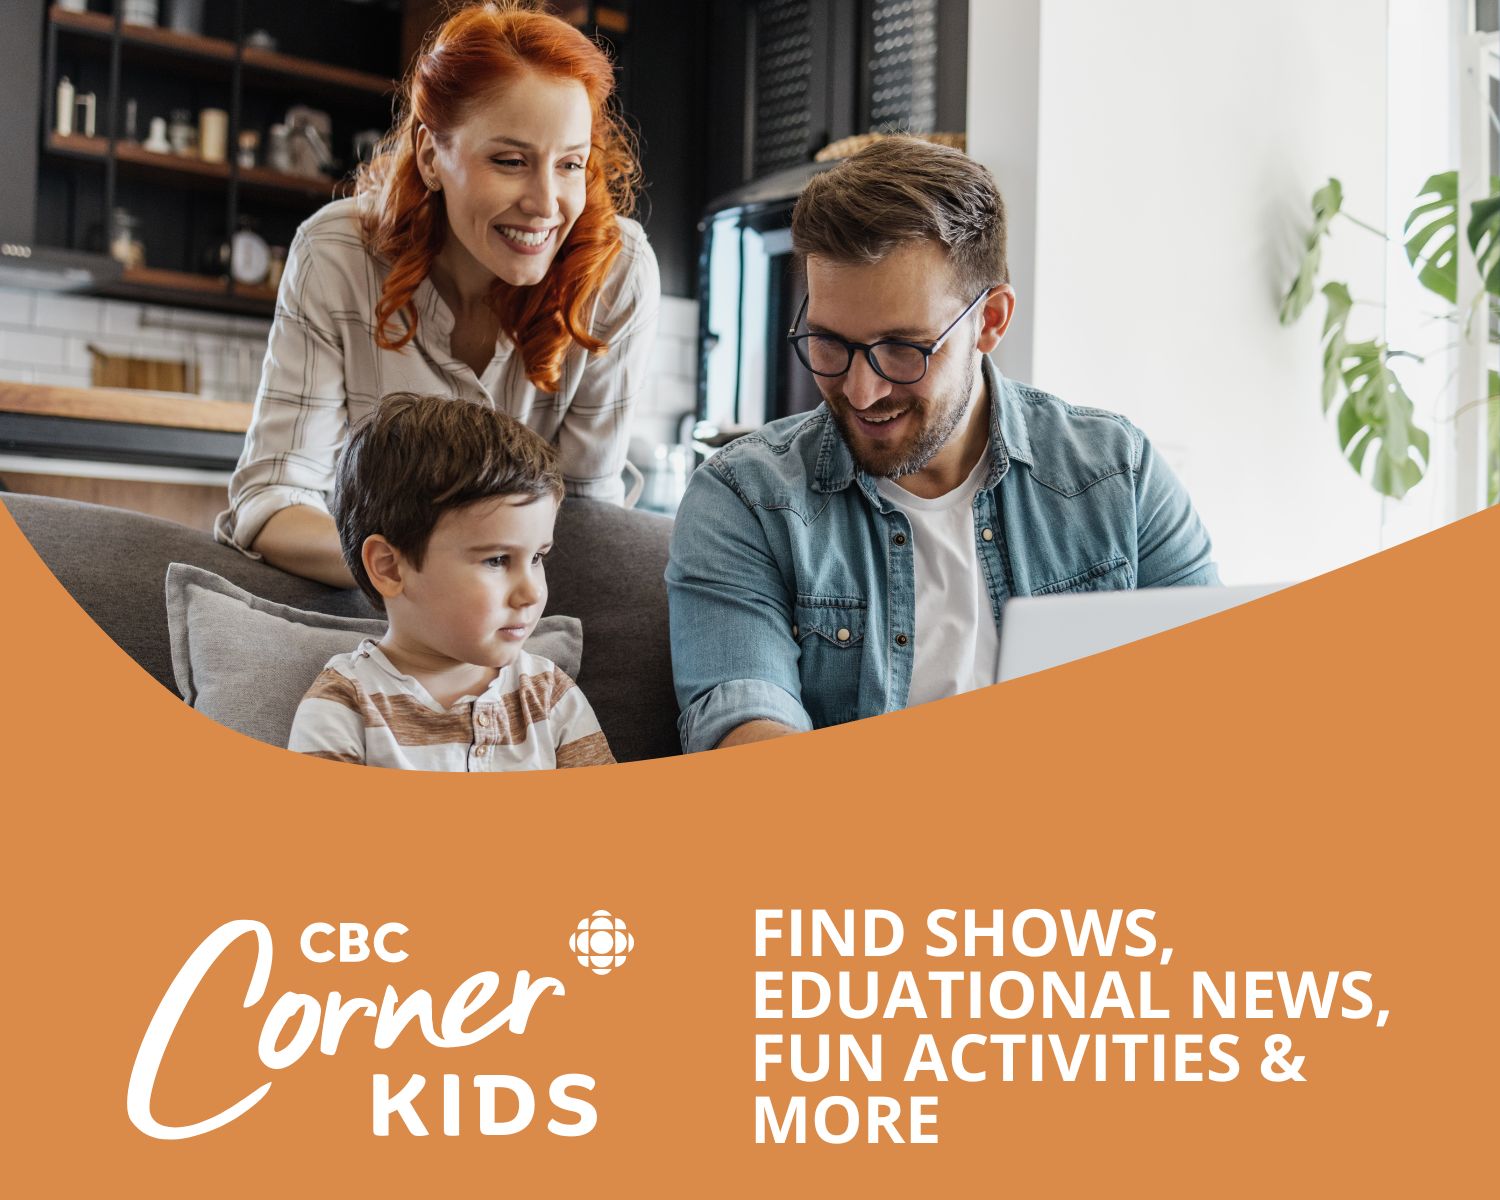 CBC Corner Kids: "Find shows, educational news, fun activities and more" - A family on a laptop